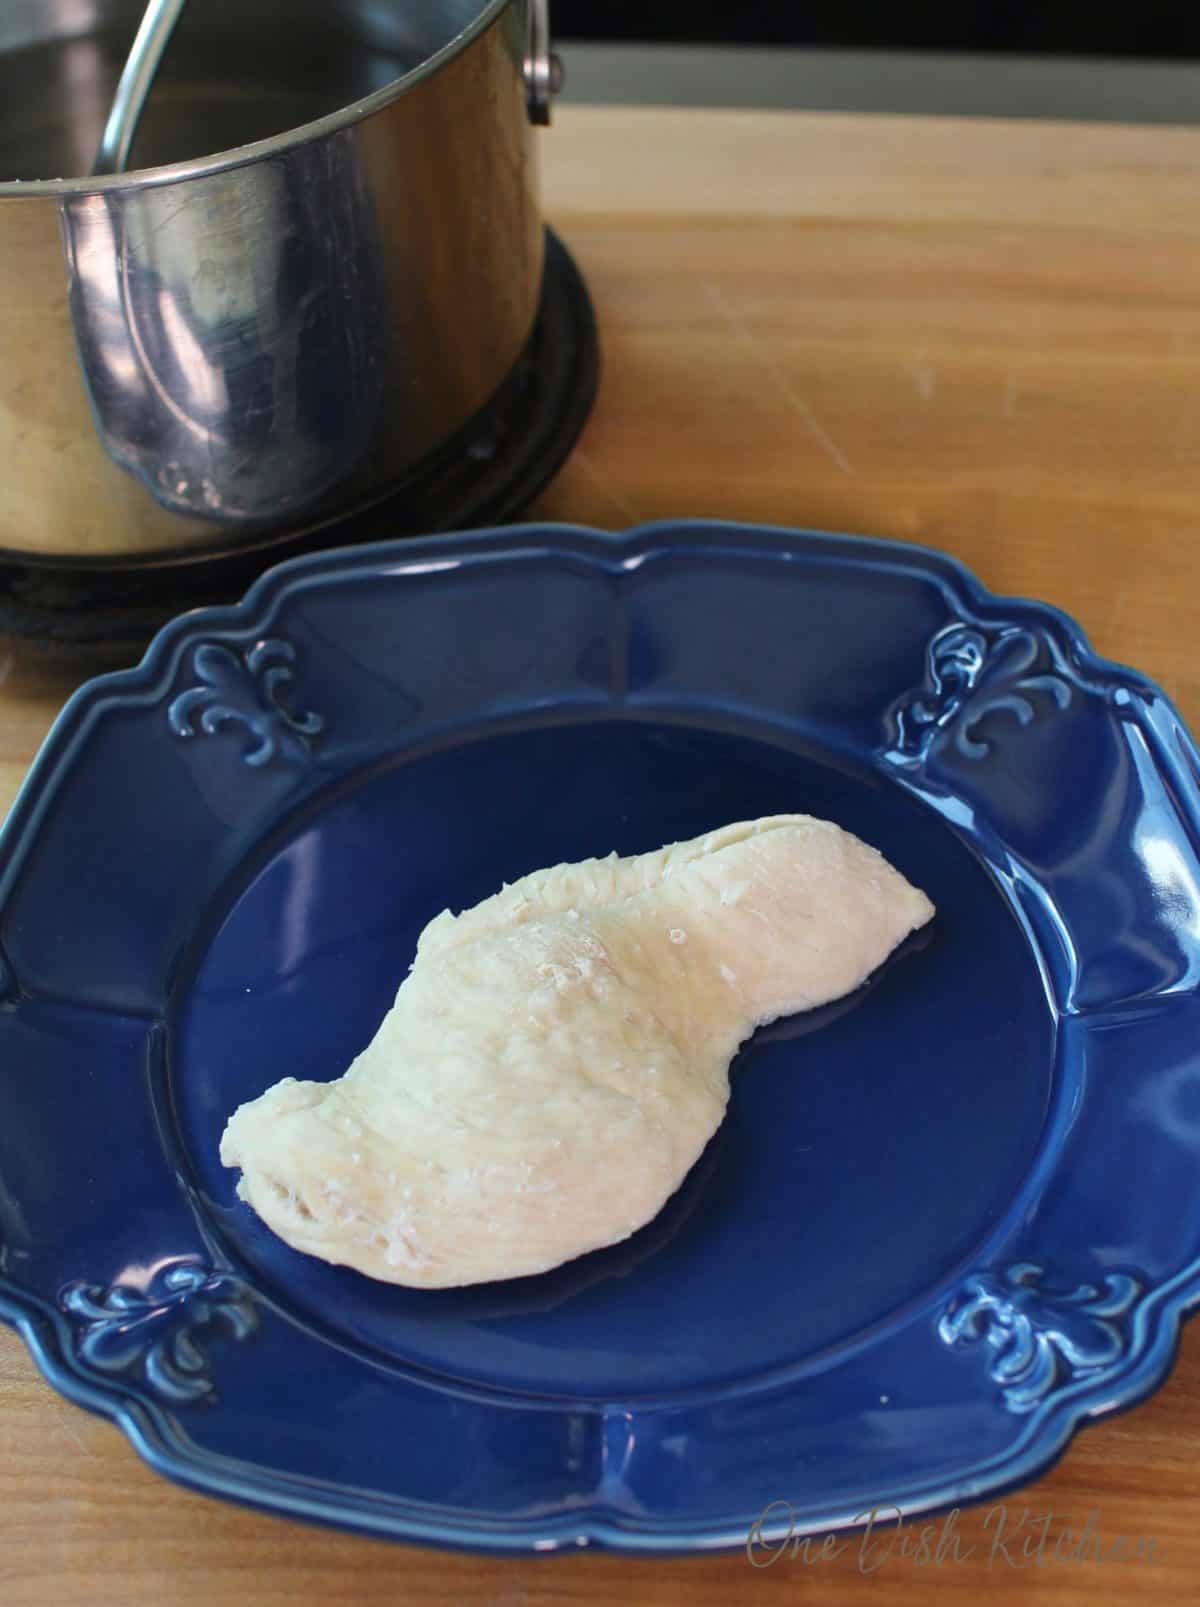 a piece of chicken on a blue plate next to a silver pot.